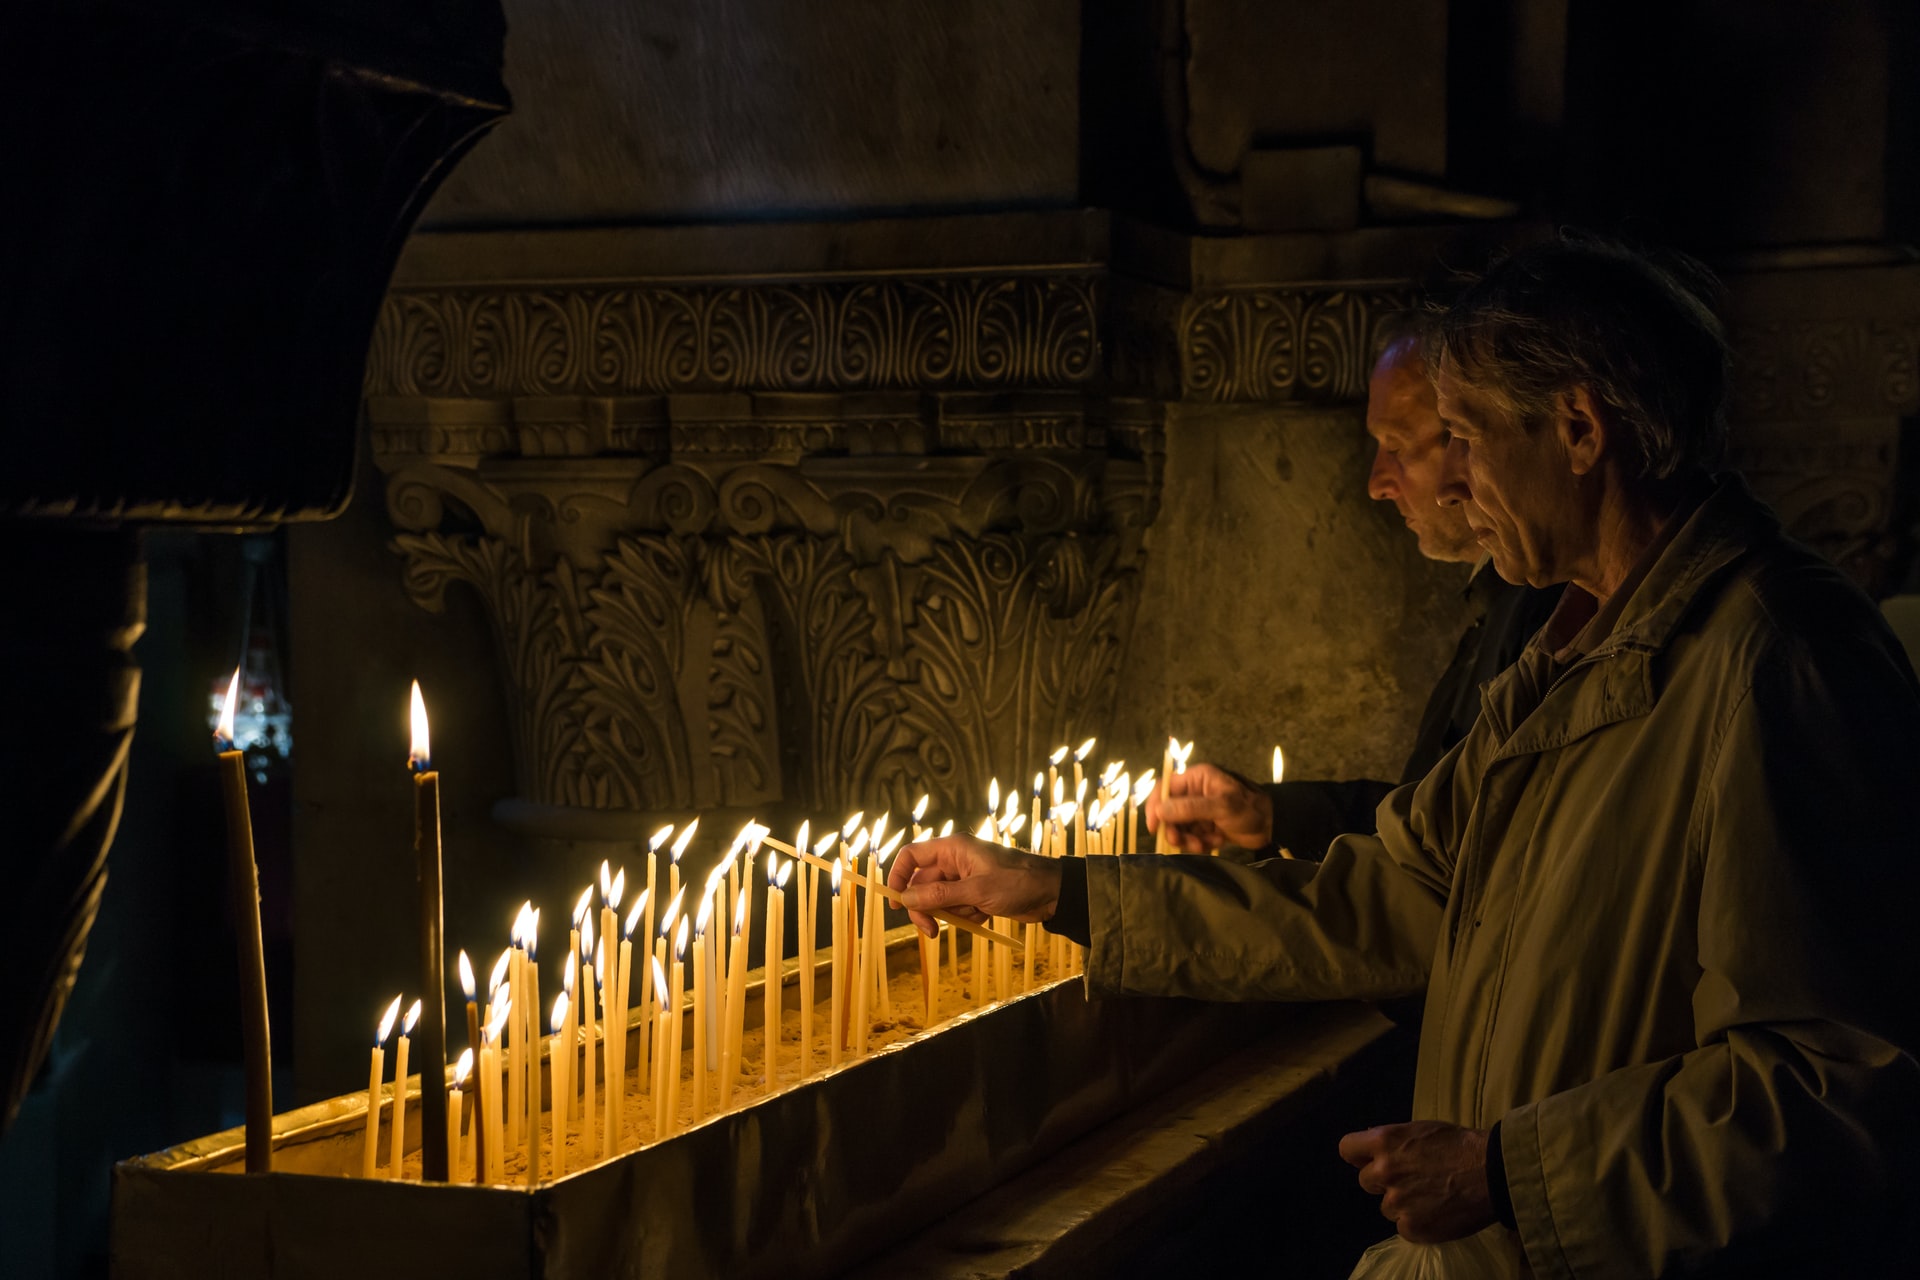 Pilgrims lighting candles in the church of the Holy Sepulchre in Jerusalem